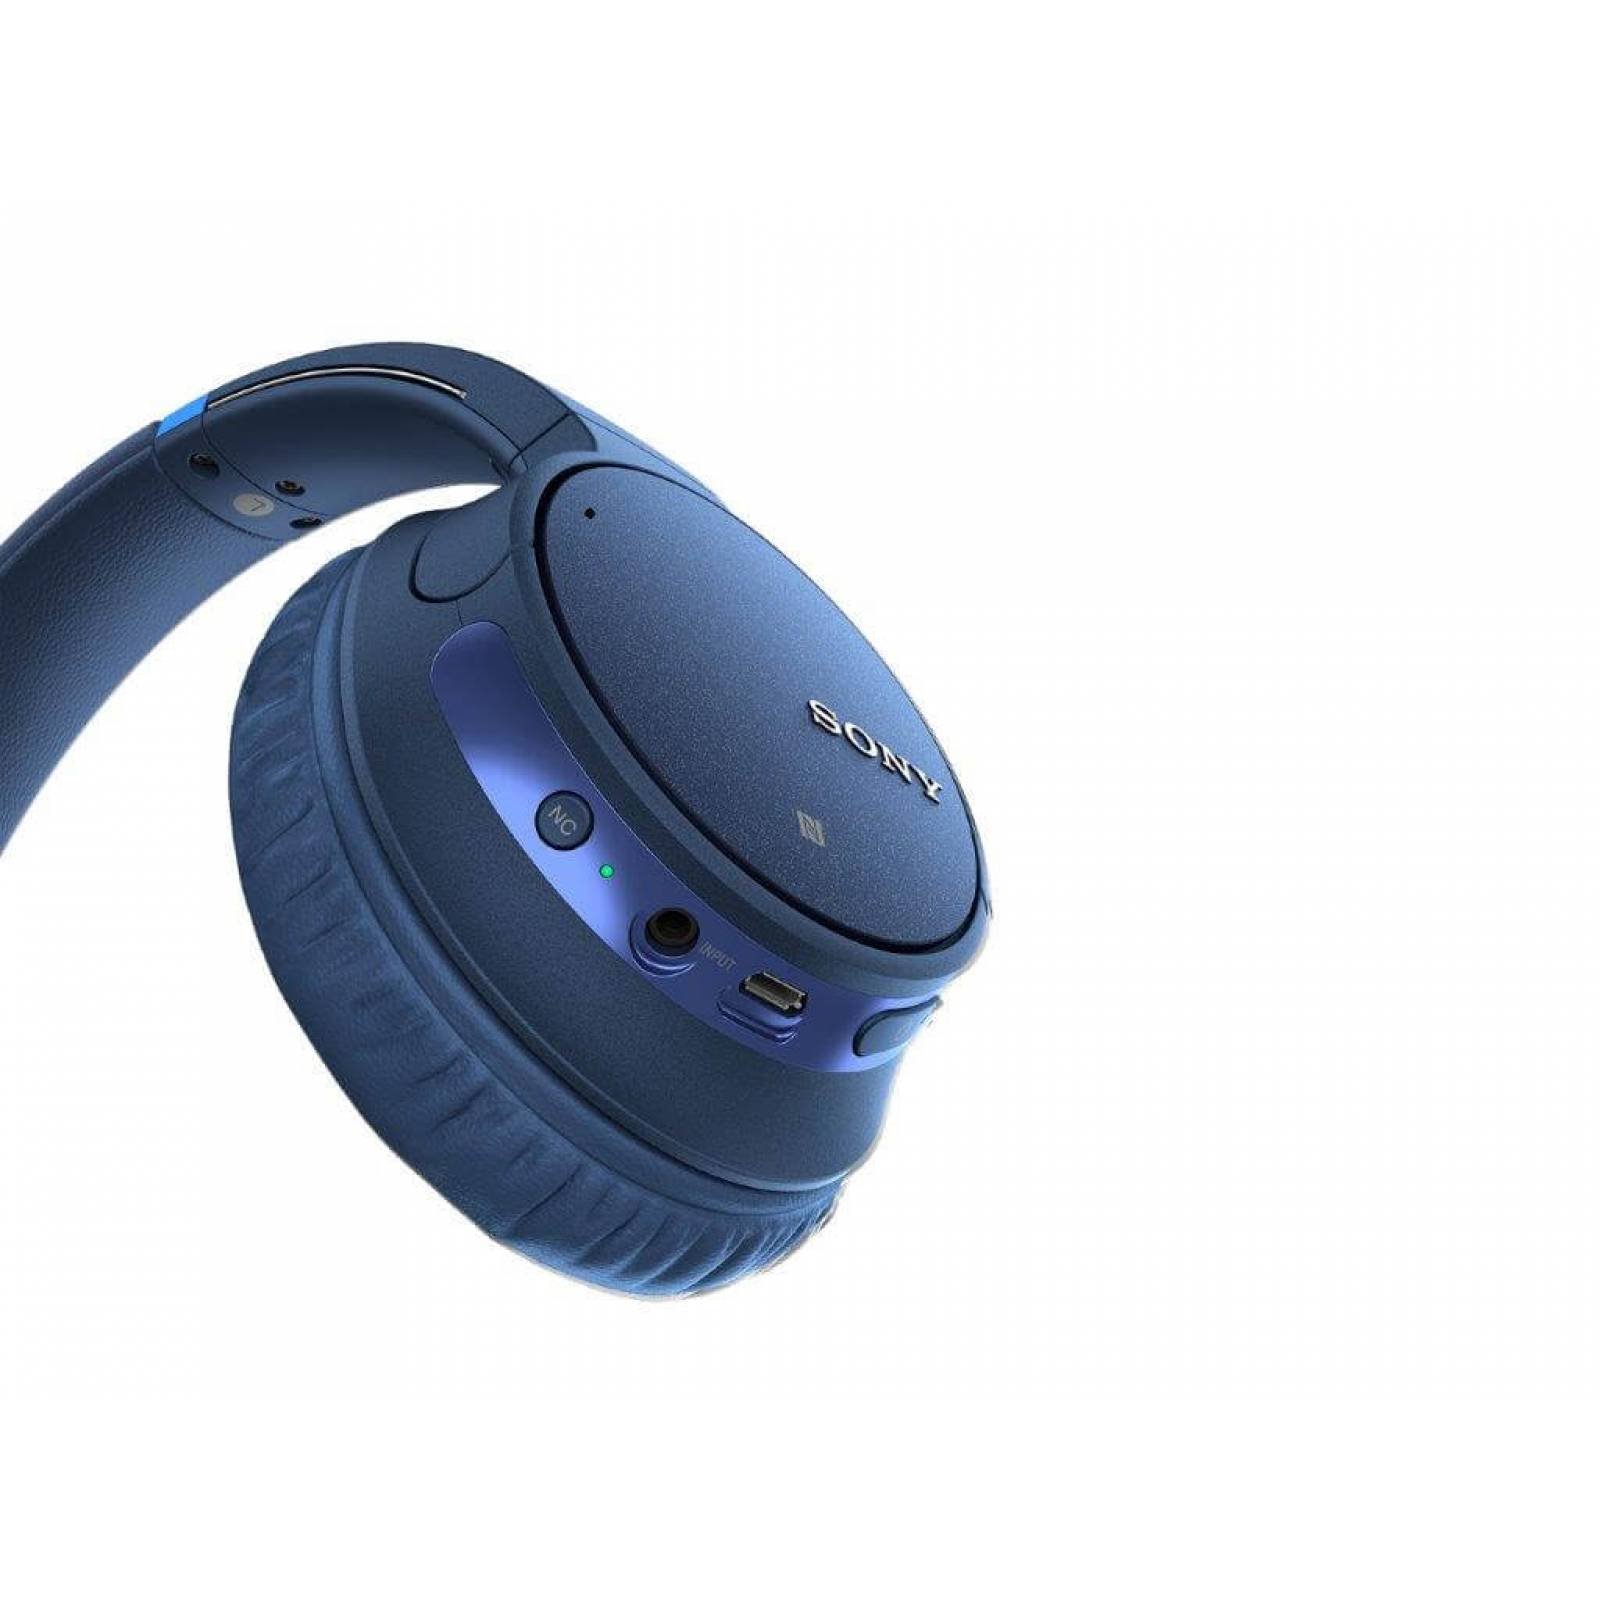 Audifonos inalambricos con Bluetooth Sony noise cancelling CH700N Azul